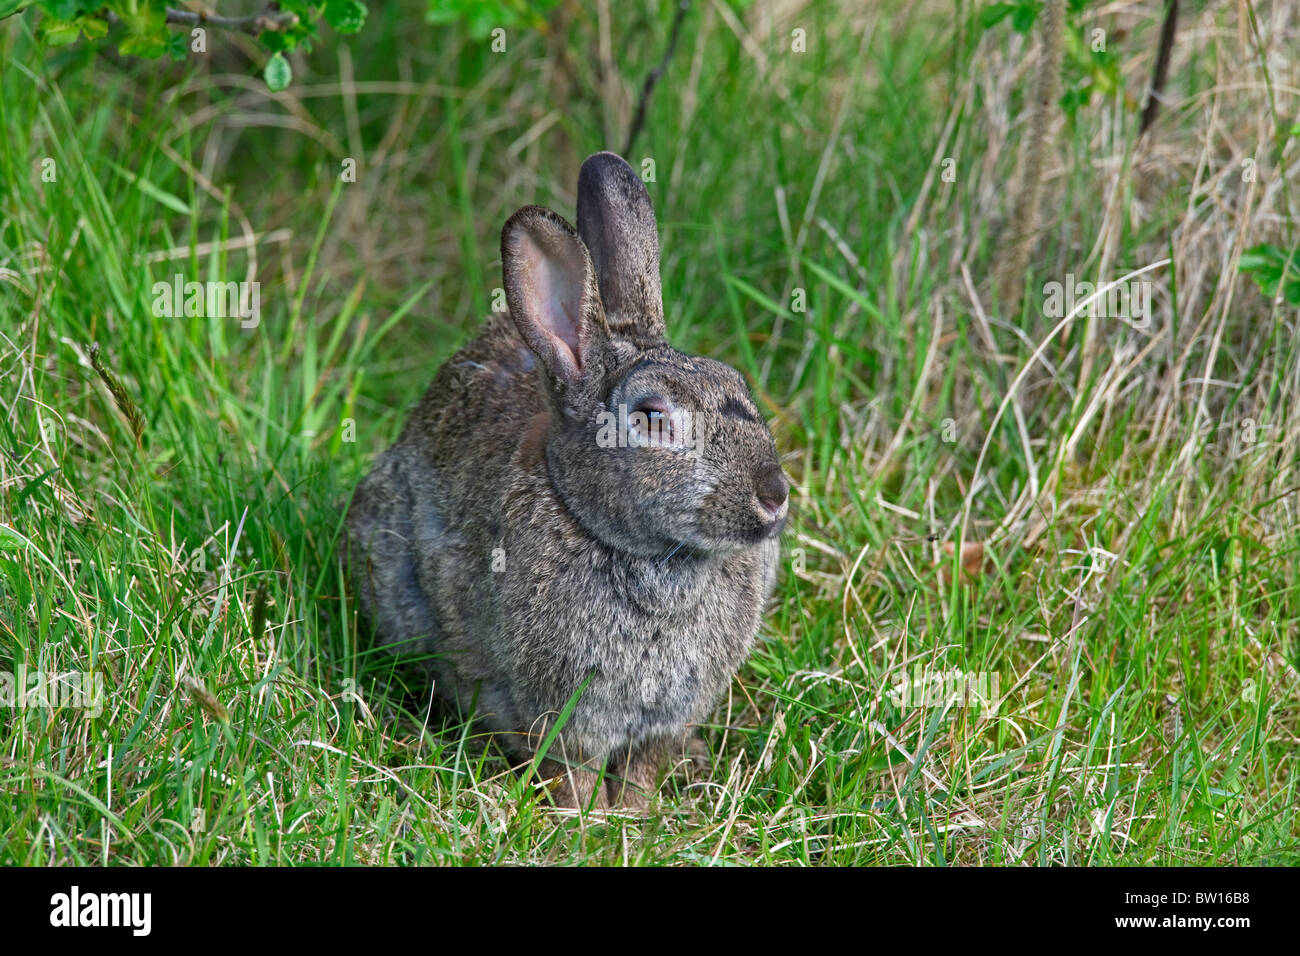 European rabbit (Oryctolagus cuniculus) with infected eyes, Germany Stock Photo